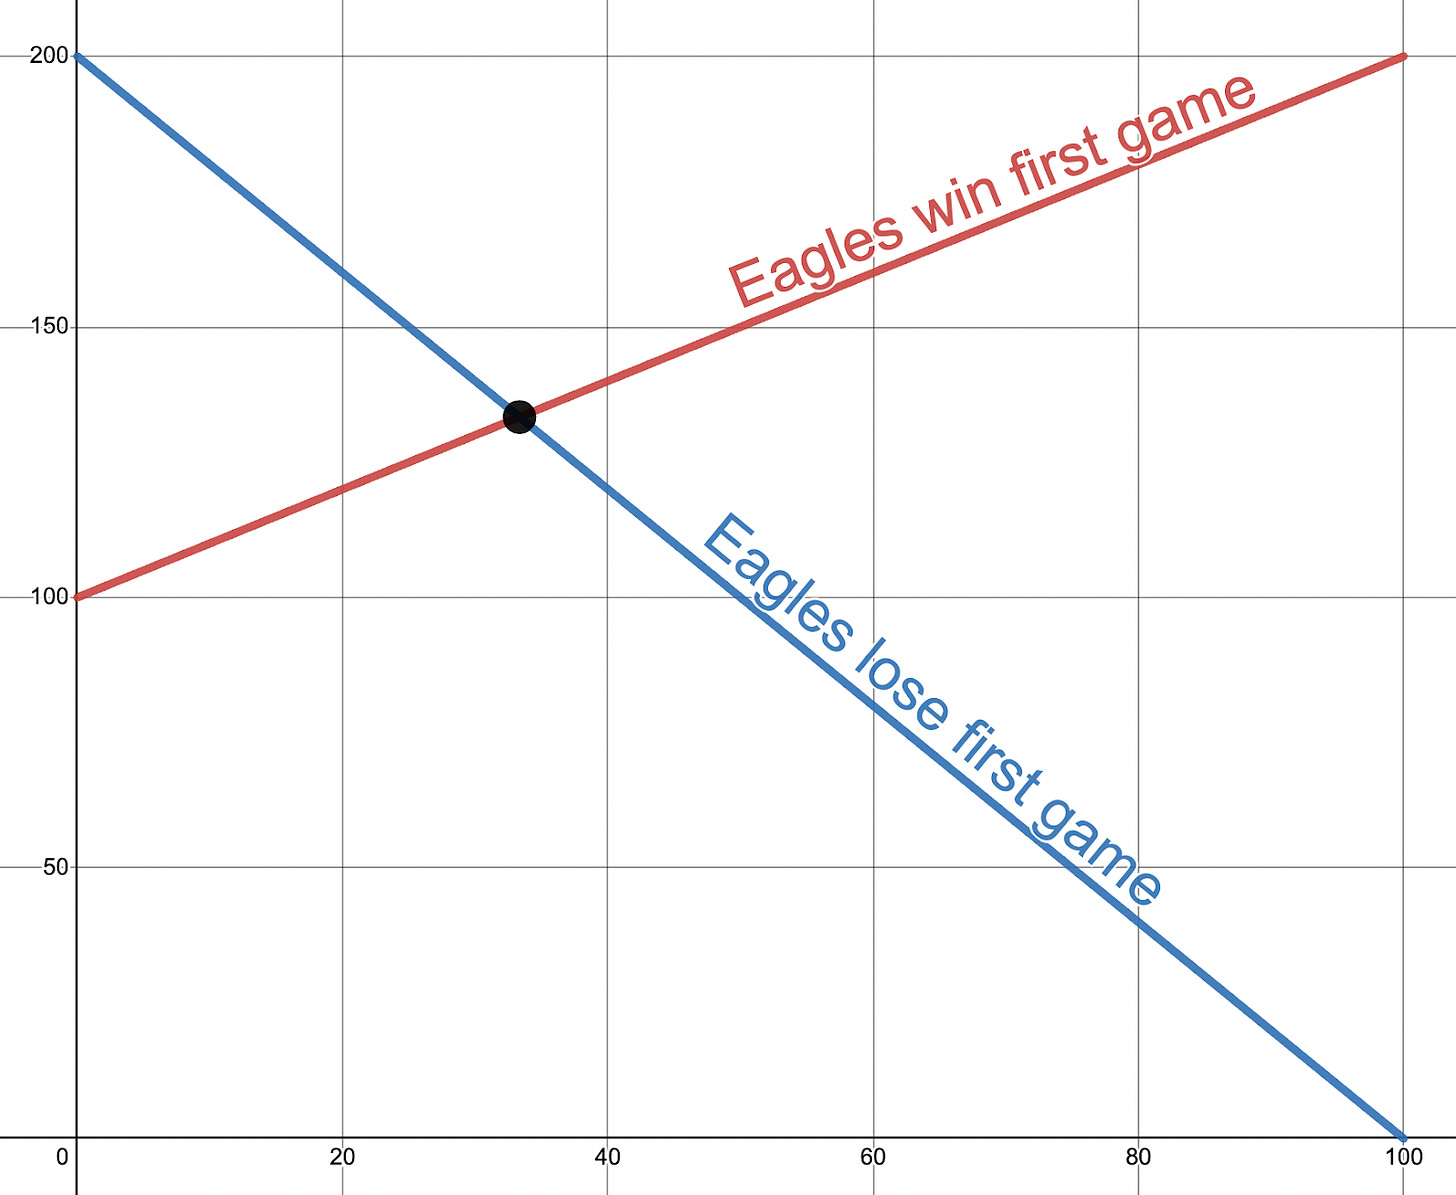 x-axis goes from 0 to 100. y-axis goes from 0 to 200. A blue line goes from (0, 200) down to (100, 0) and is labeled "Eagles lose first game." A red line goes from (0, 100) to (100, 200) and is labeled "Eagles win first game." The intersection appears to be at (33, 133).